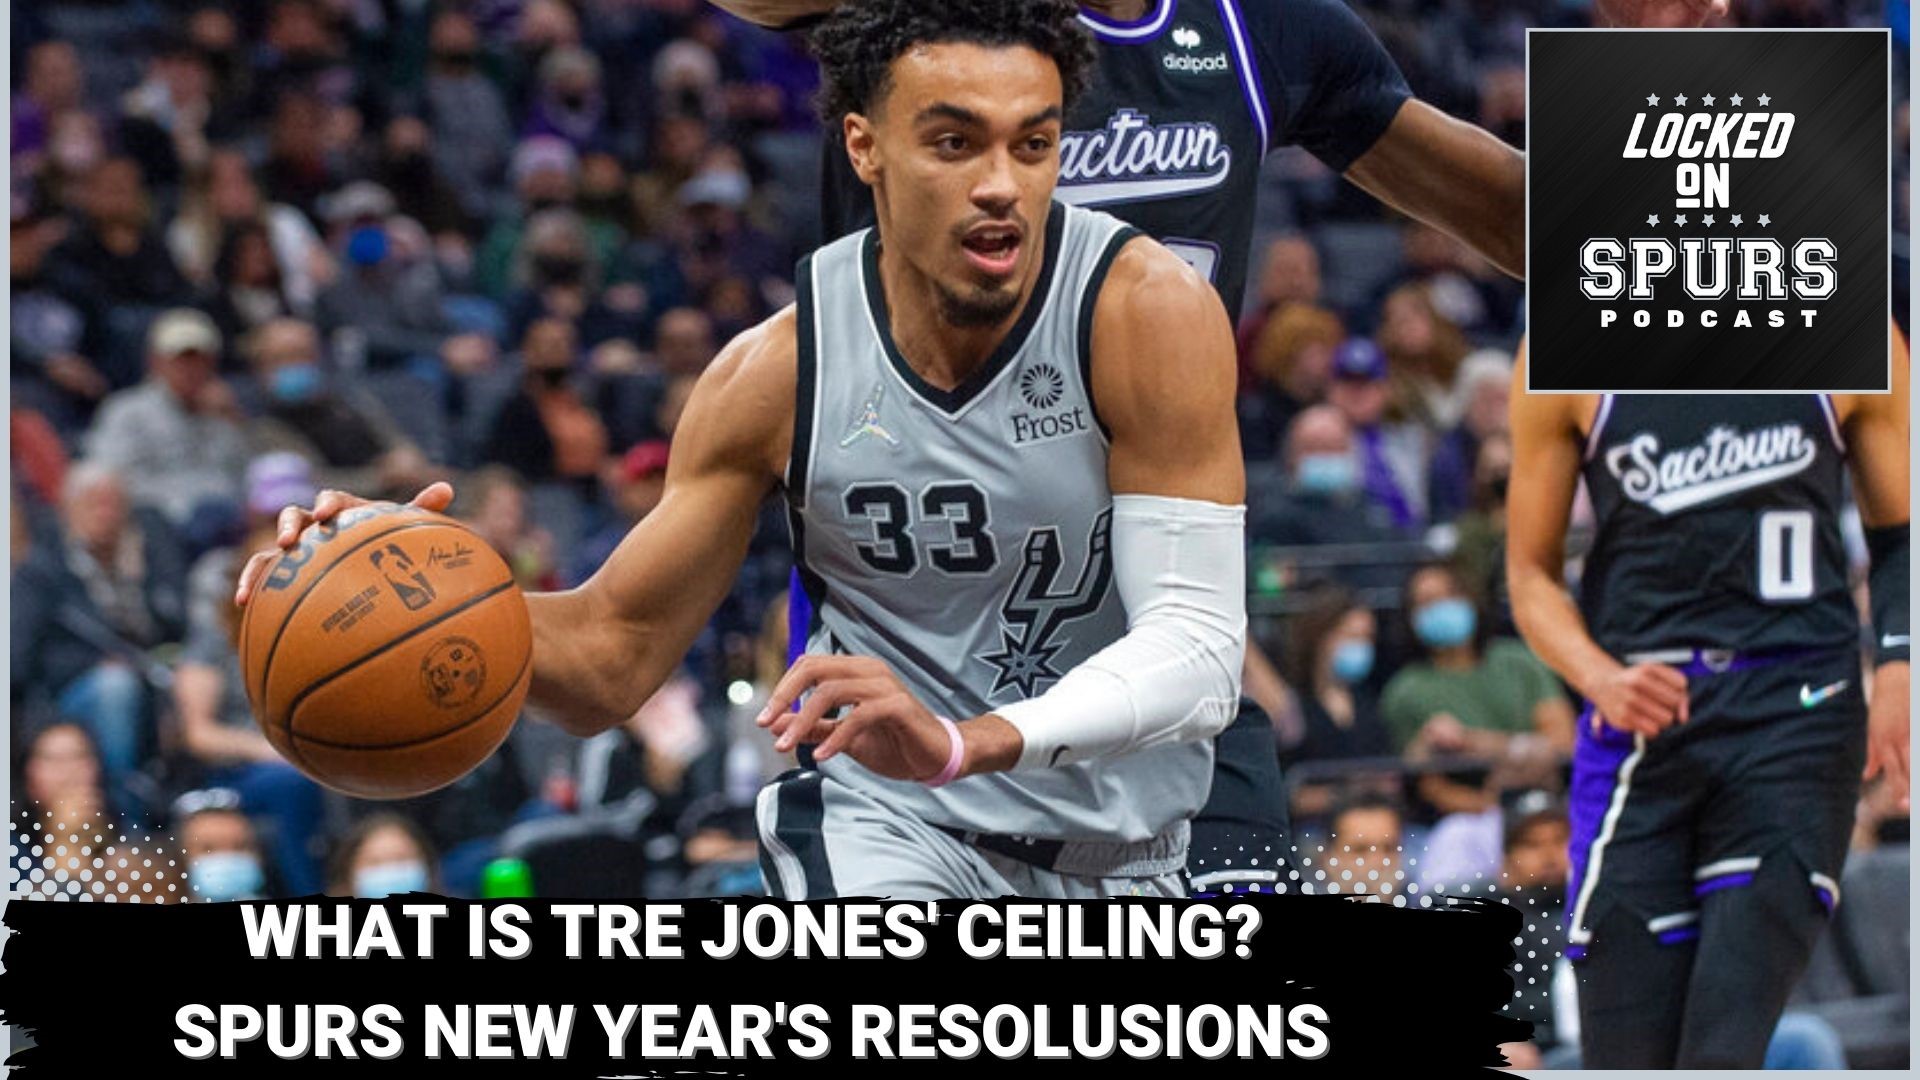 What are some New Year's resolutions for the Silver and Black?